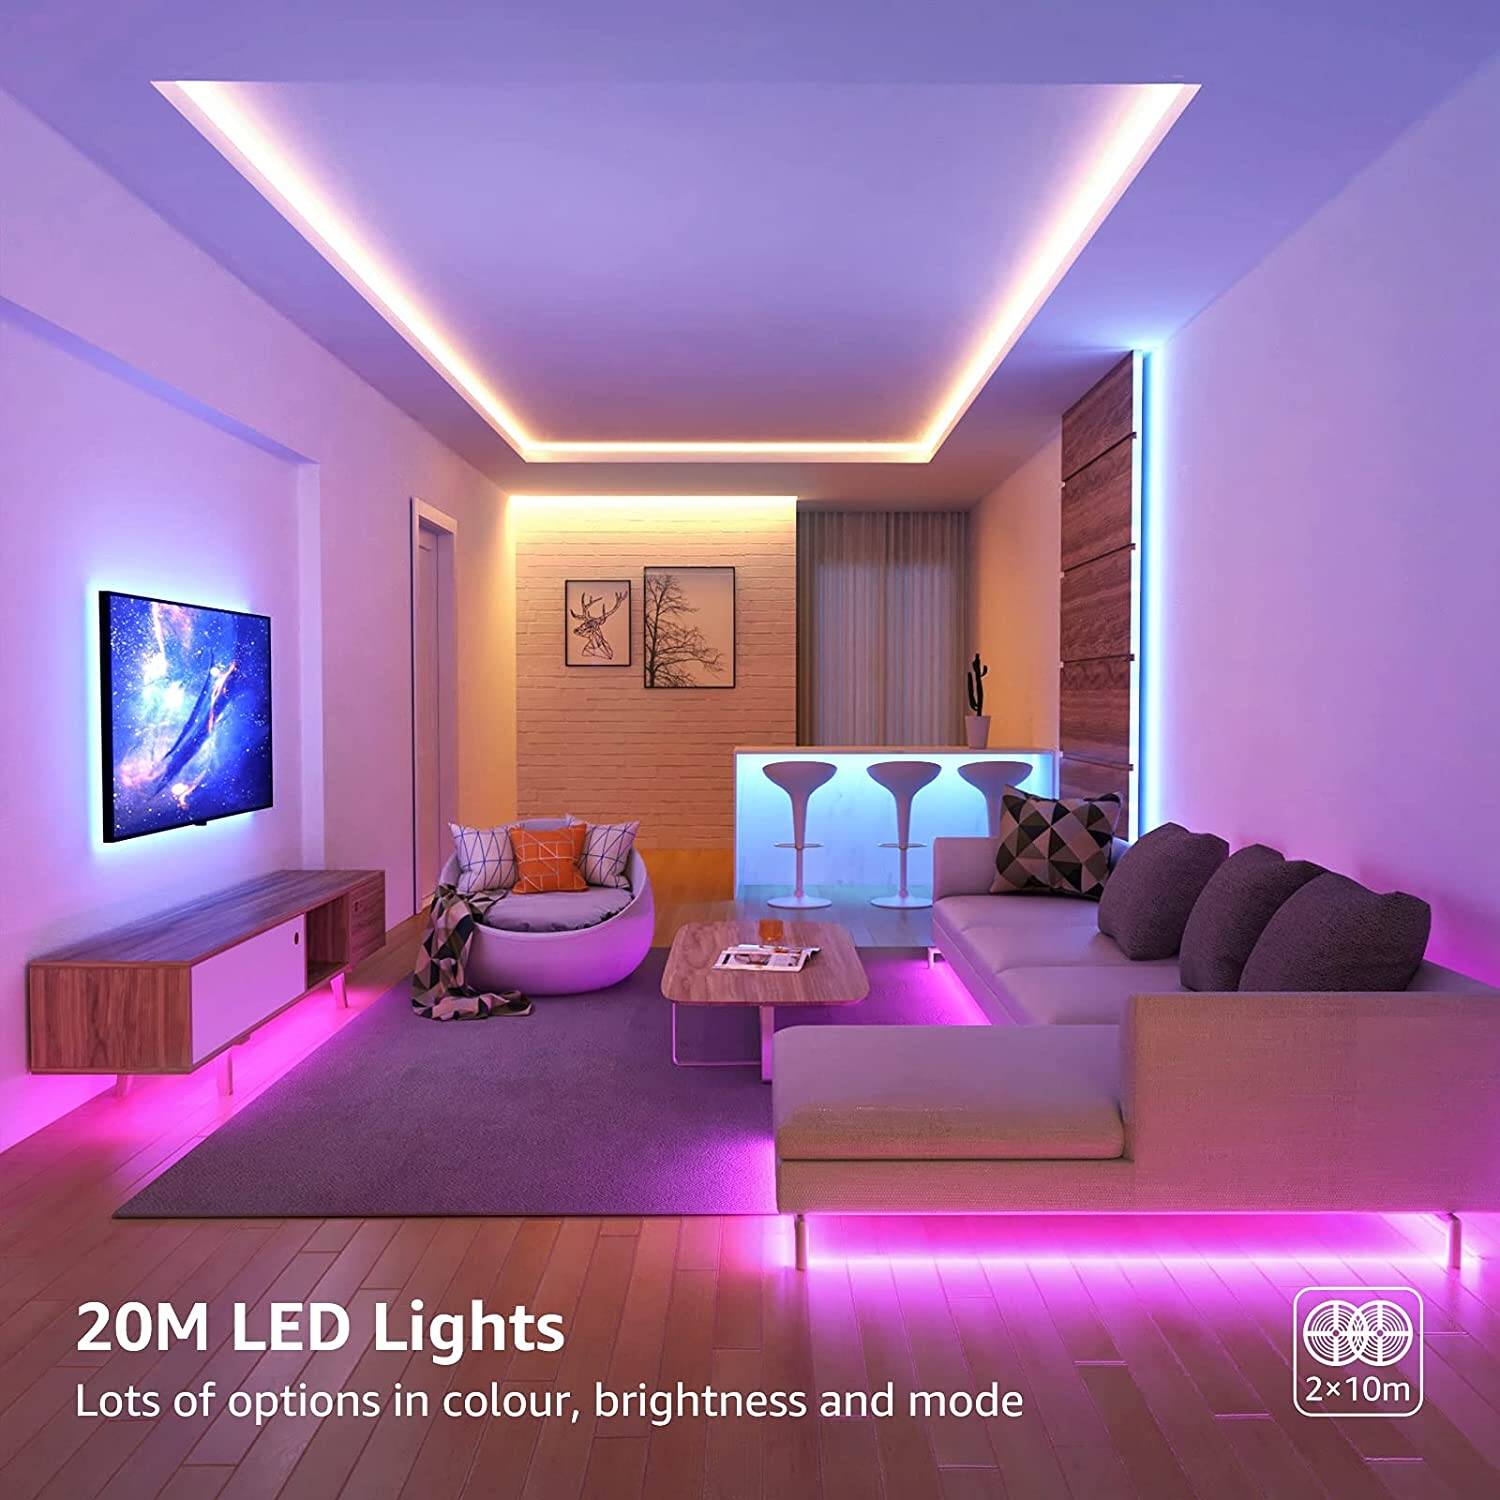 Lepro 20M LED Strip Lights with Remote, RGB Colour Changing, Dimmable Strip  Lighting, Long Plug in LED Lights for Bedroom, Kitchen, Daughters Room (2 x  10M, Stick on, 600 Bright 5050 LEDs), led lights